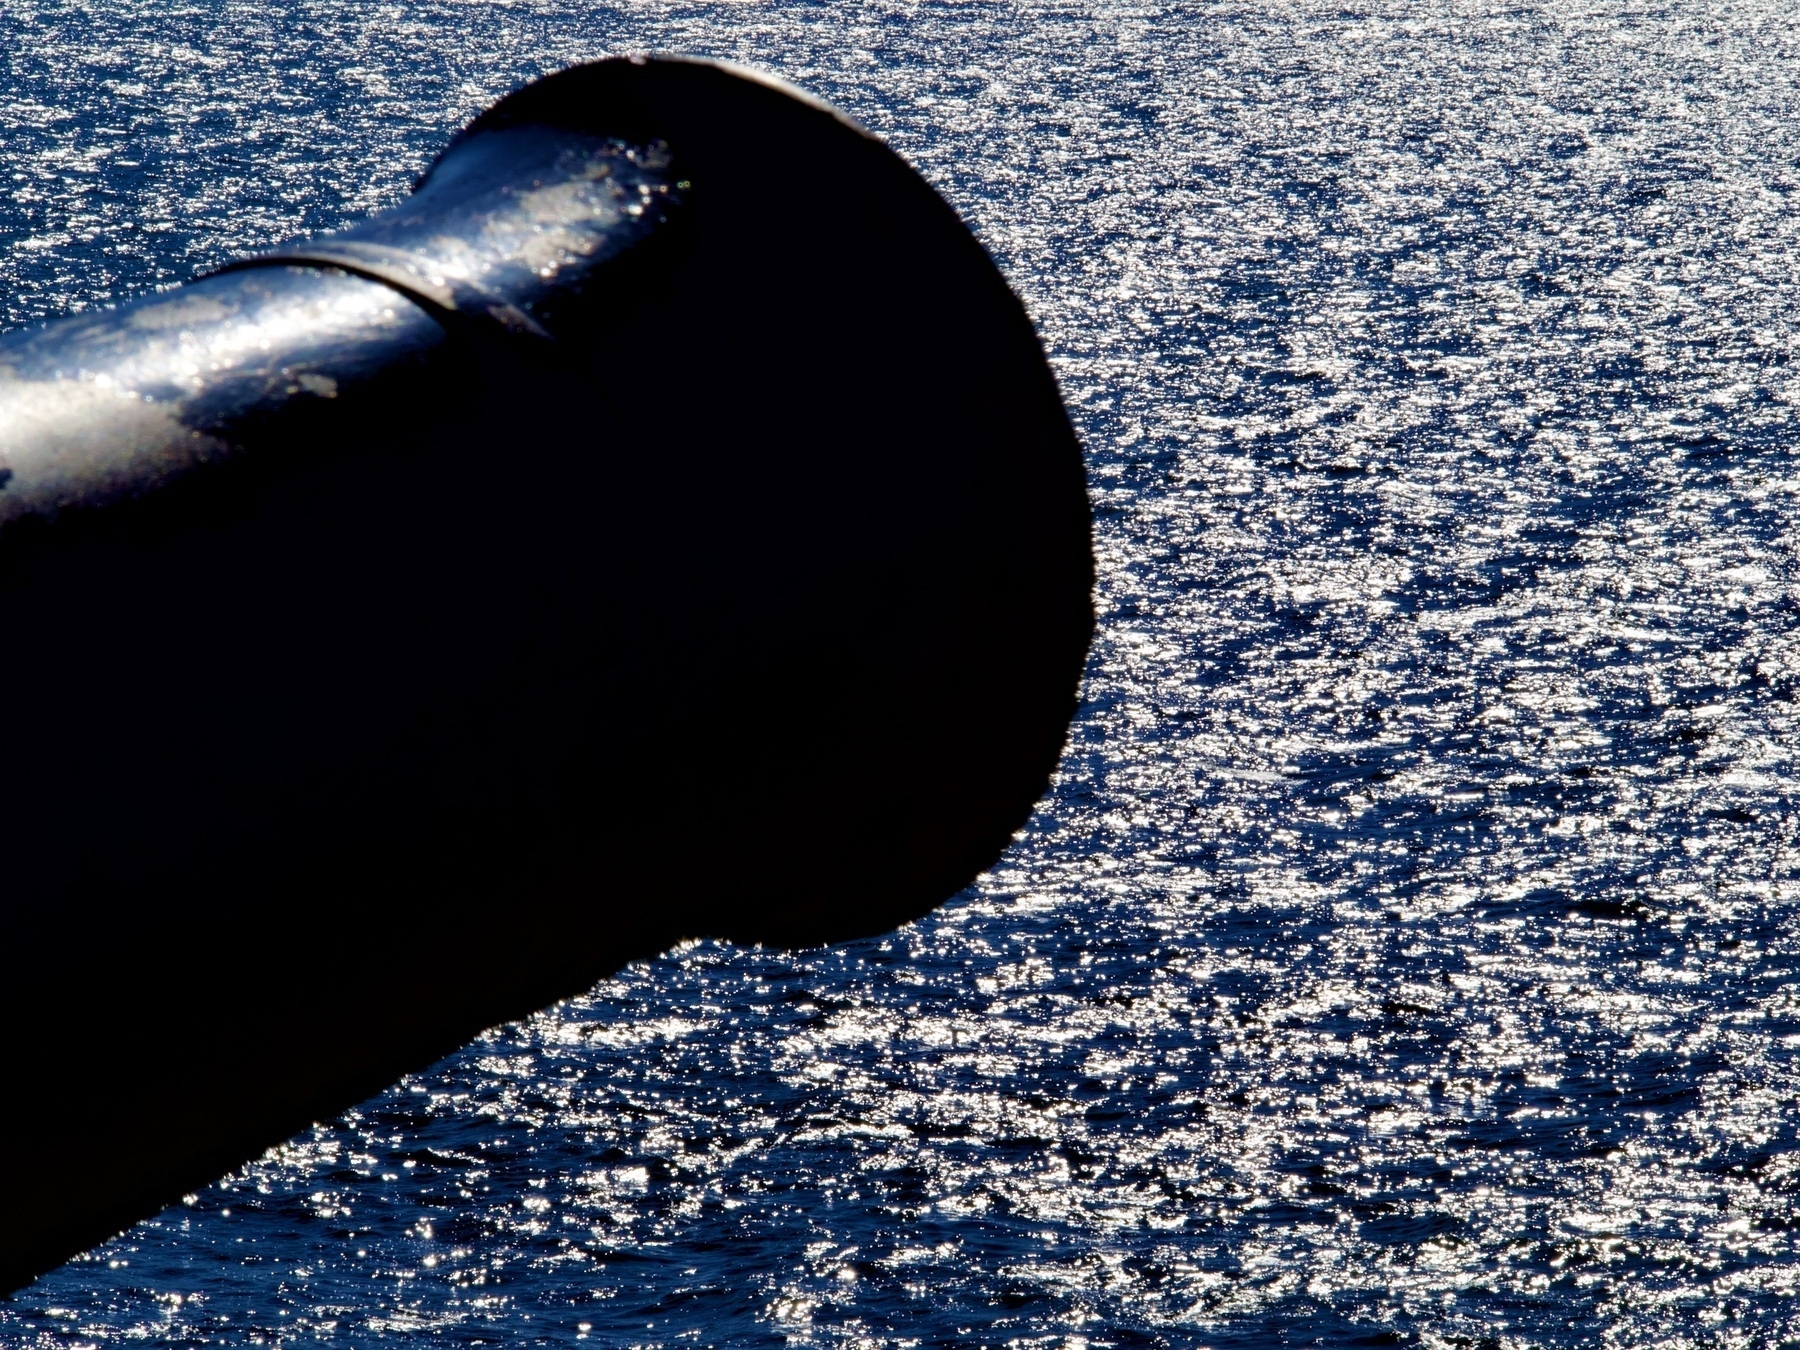 The silhouette of an old black cannon against the reflective surface of the ocean